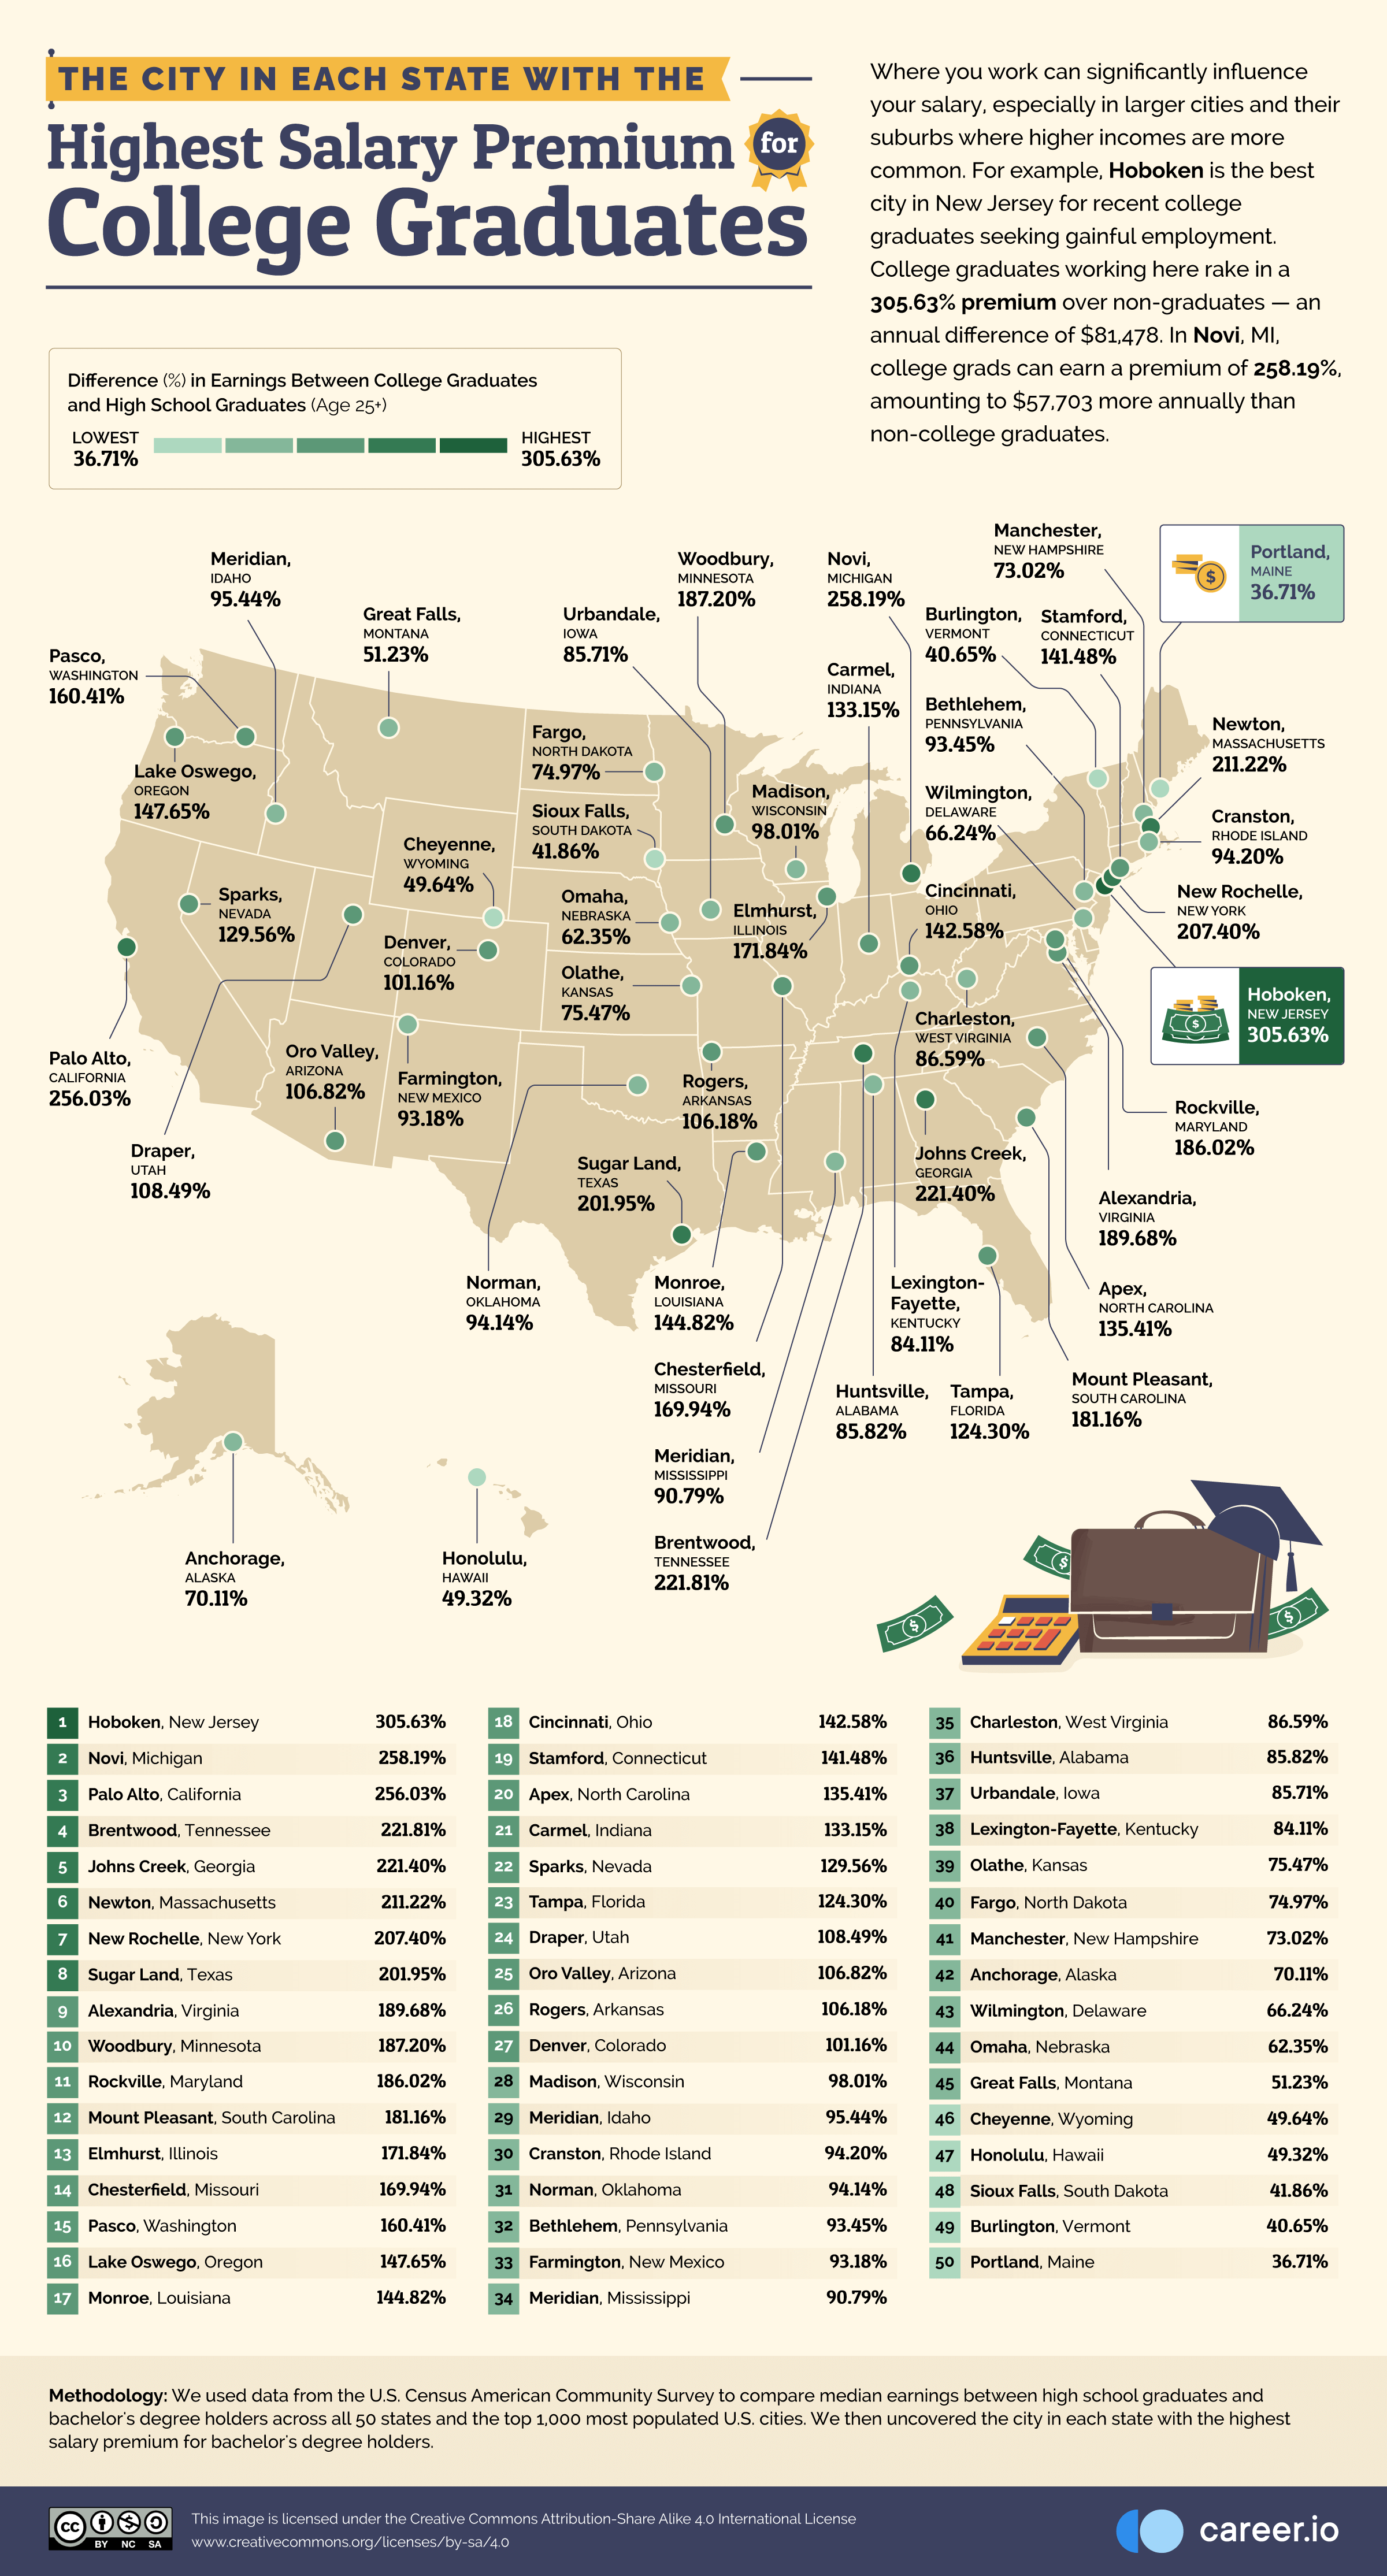 03 The-City-in-Each-State-With-the-Highest-Salary-Premium-for-College-Graduates